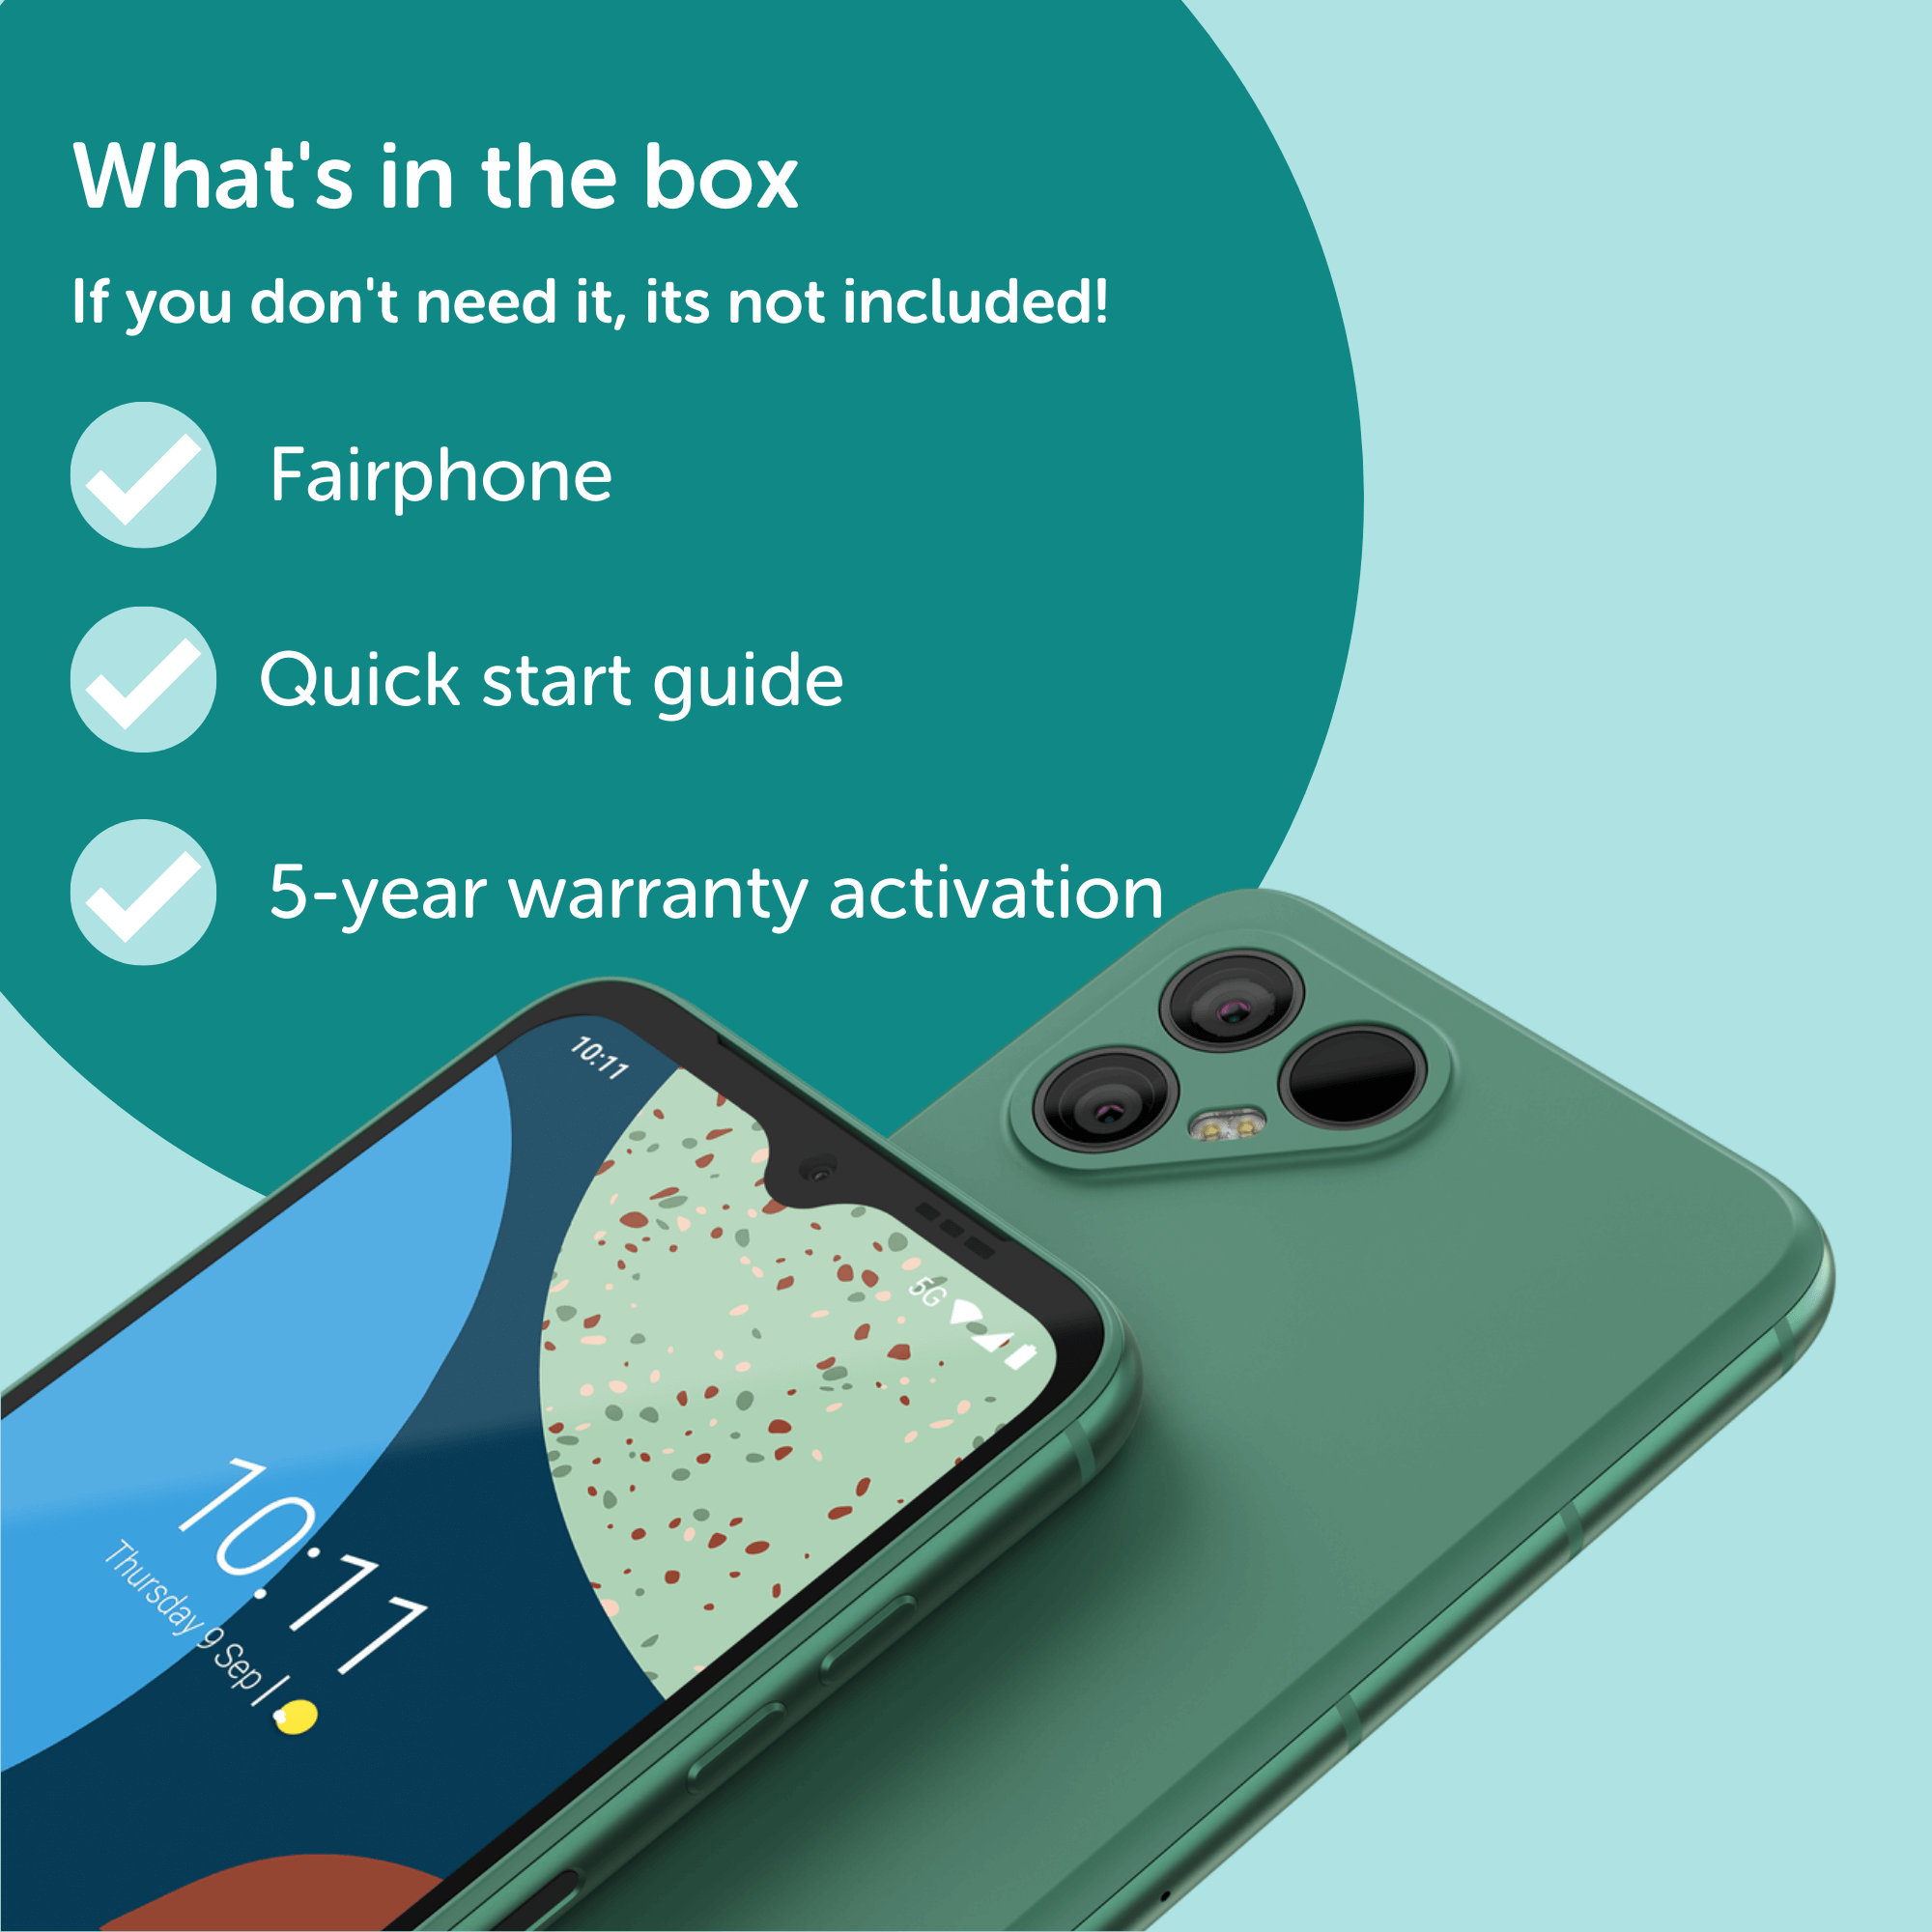 Fairphone 4 what's included in the box